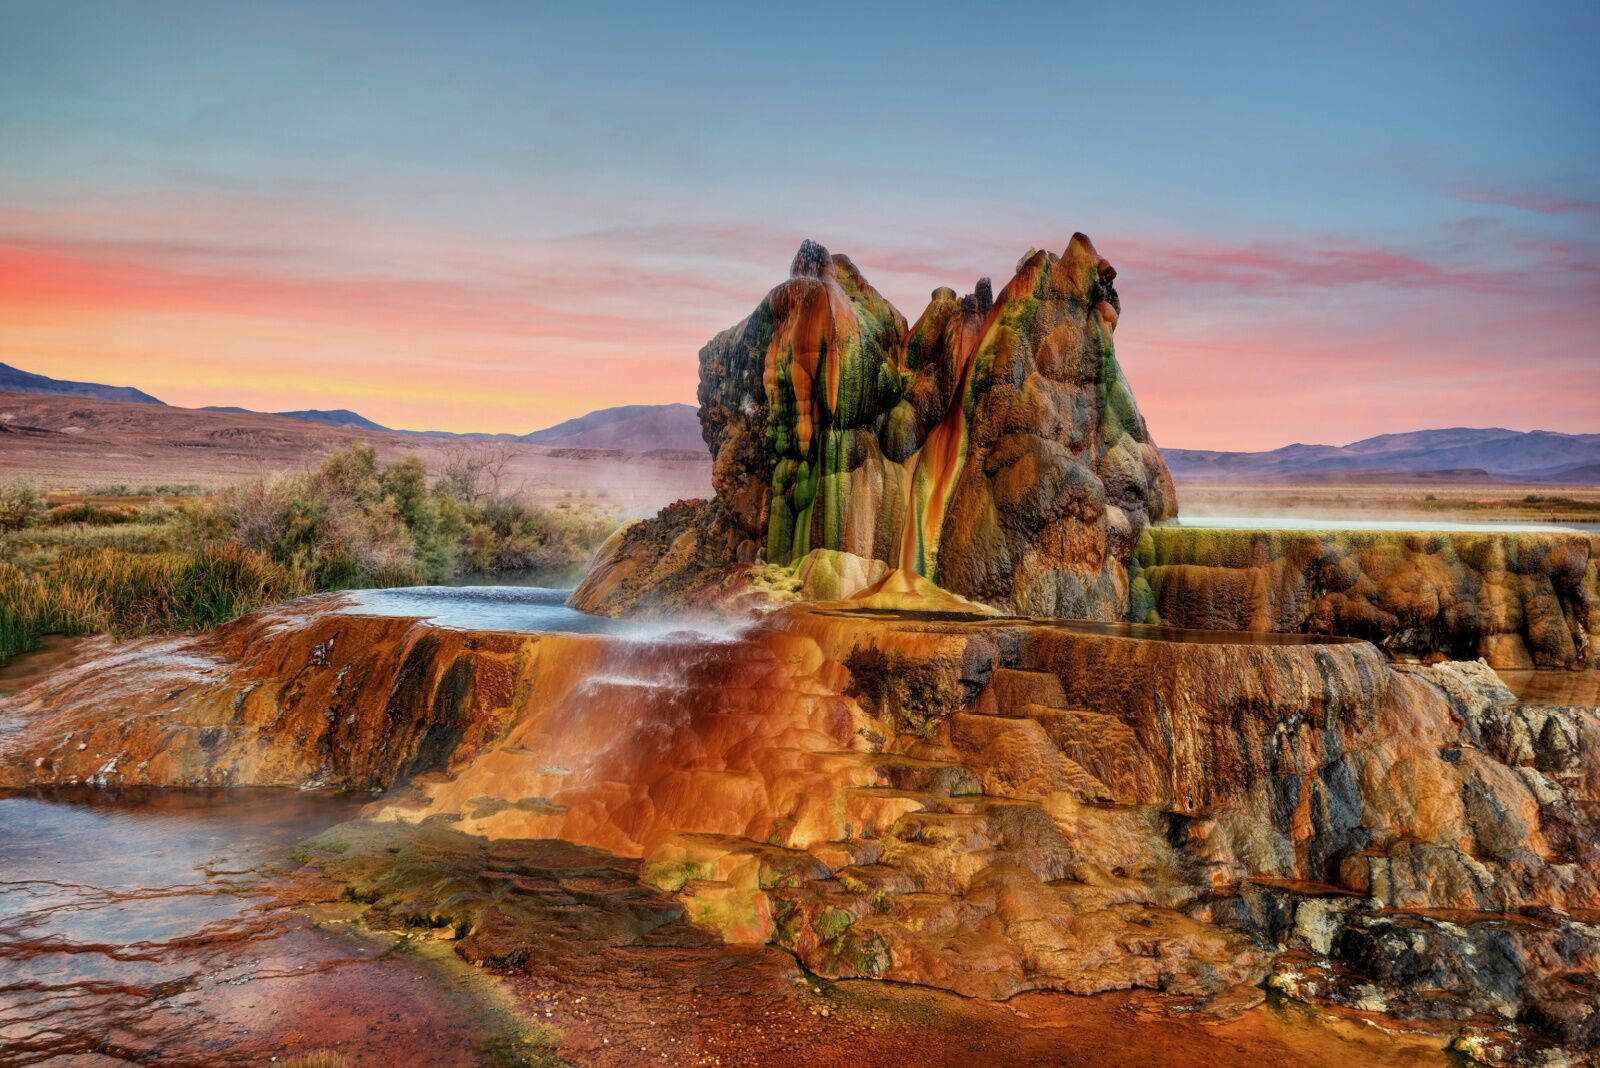 Fly Geyser, one of the best reno day trips in the dessert